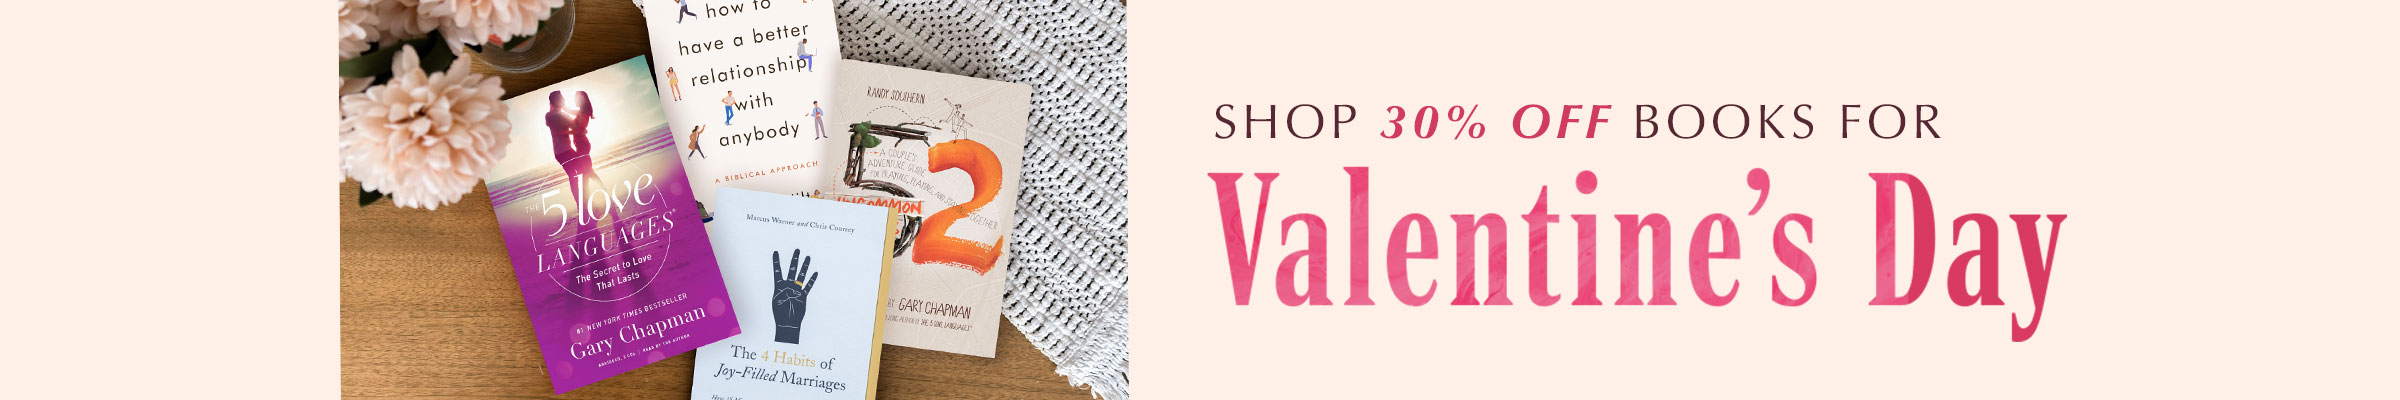 Shop 30% Off Books for Valentine's Day.